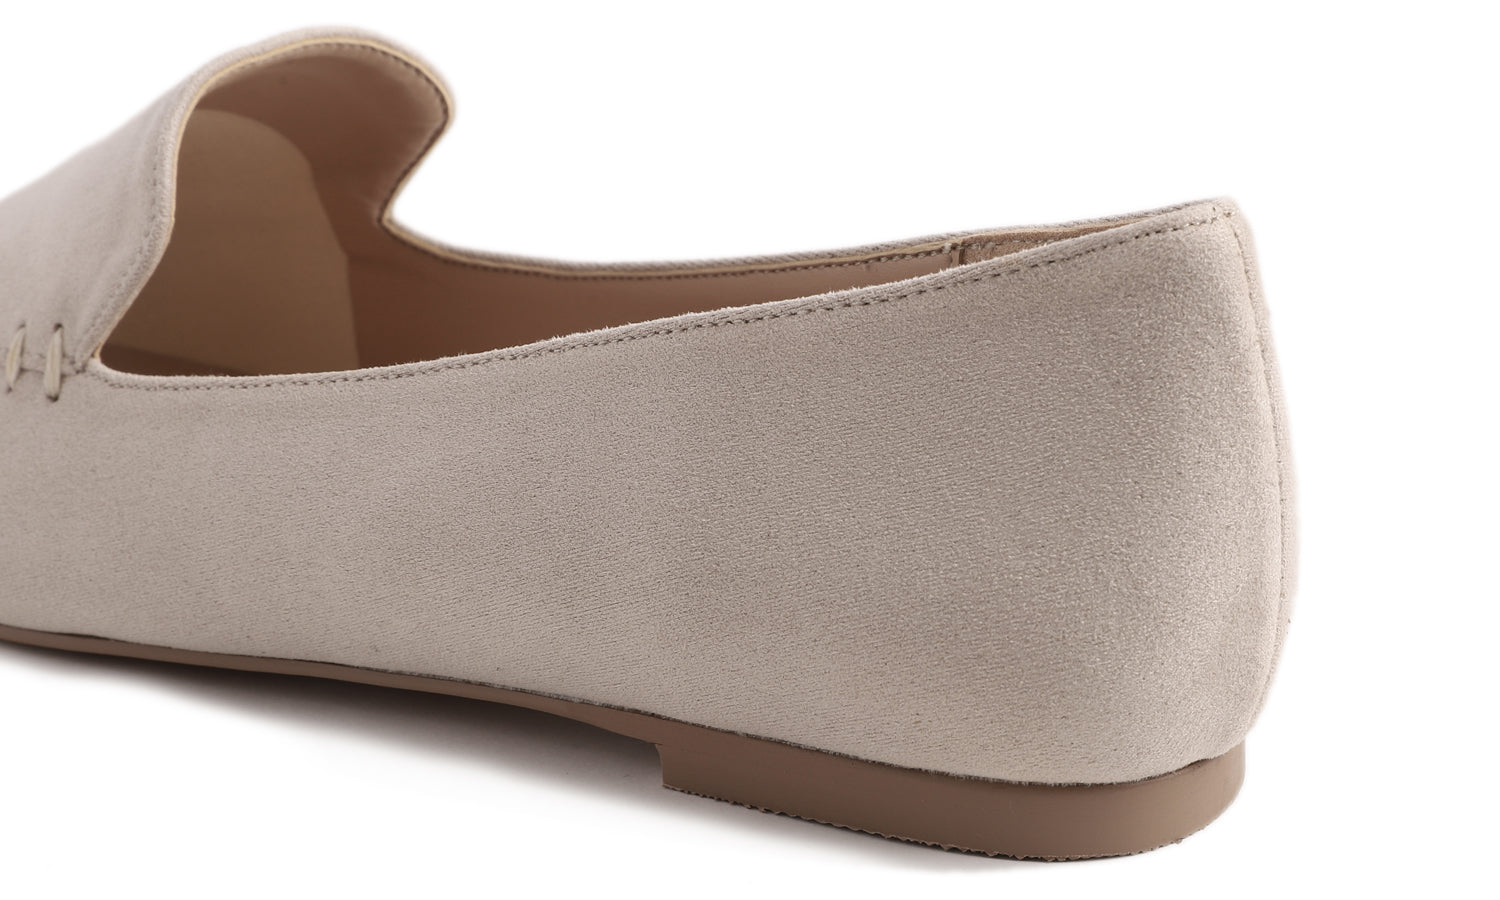 Feversole Women's Loafer Flat Pointed Fashion Slip On Comfort Driving Office Shoes Light Taupe Faux Suede